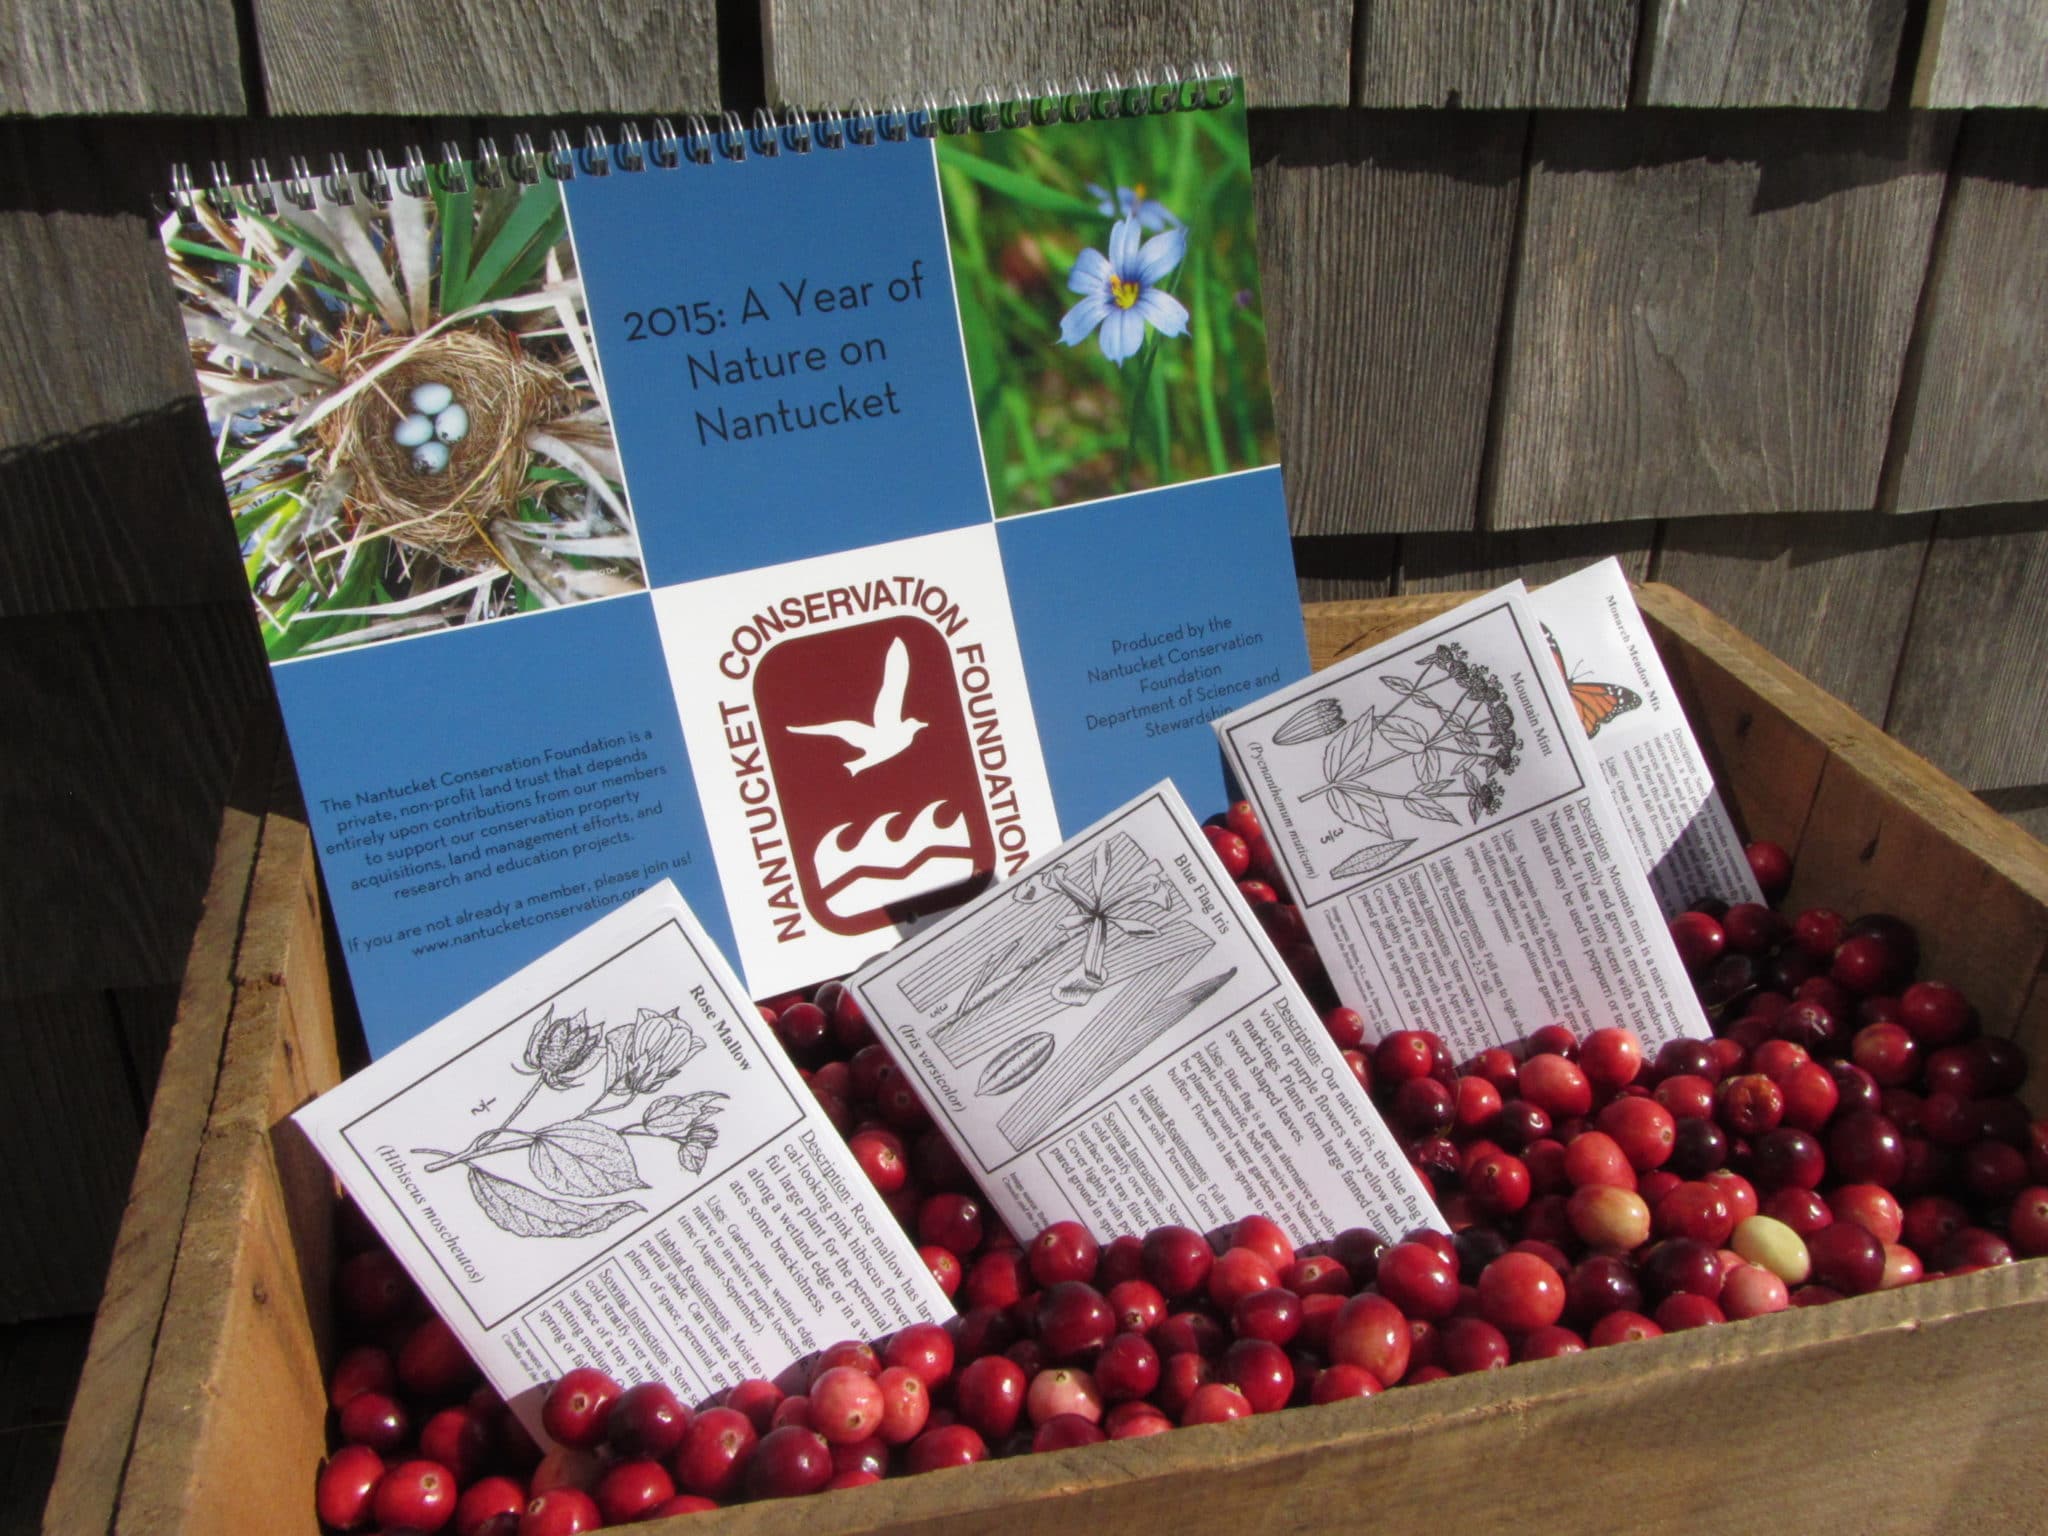 New at this year's Cranfest--a calendar prepared by NCF's Science and Stewardship Department. And back by popular request: locally collected native plant seeds.